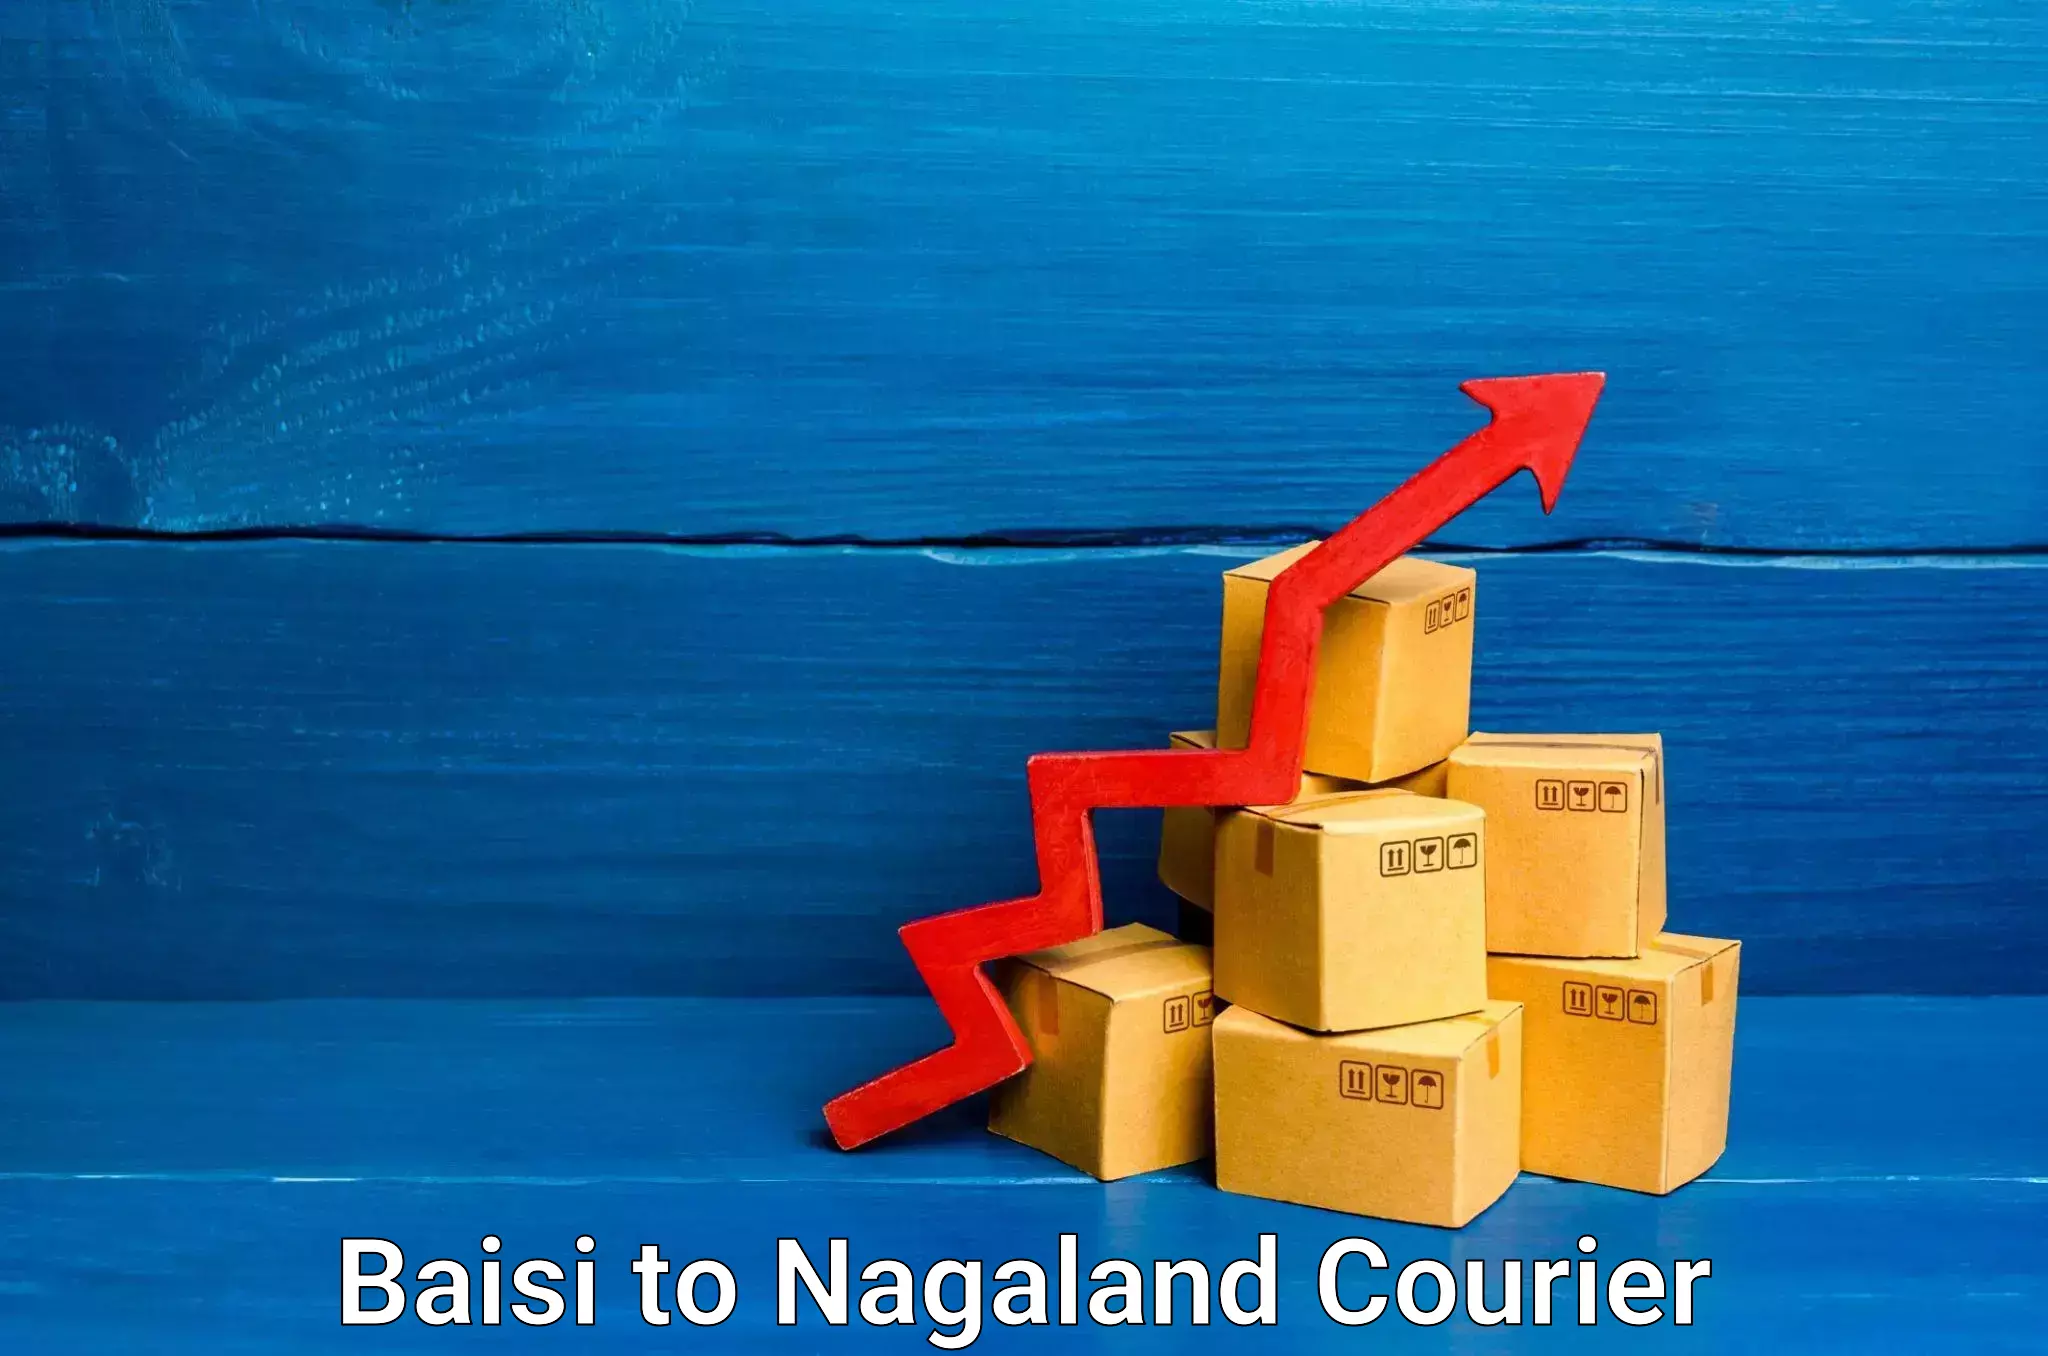 Home relocation experts Baisi to Nagaland